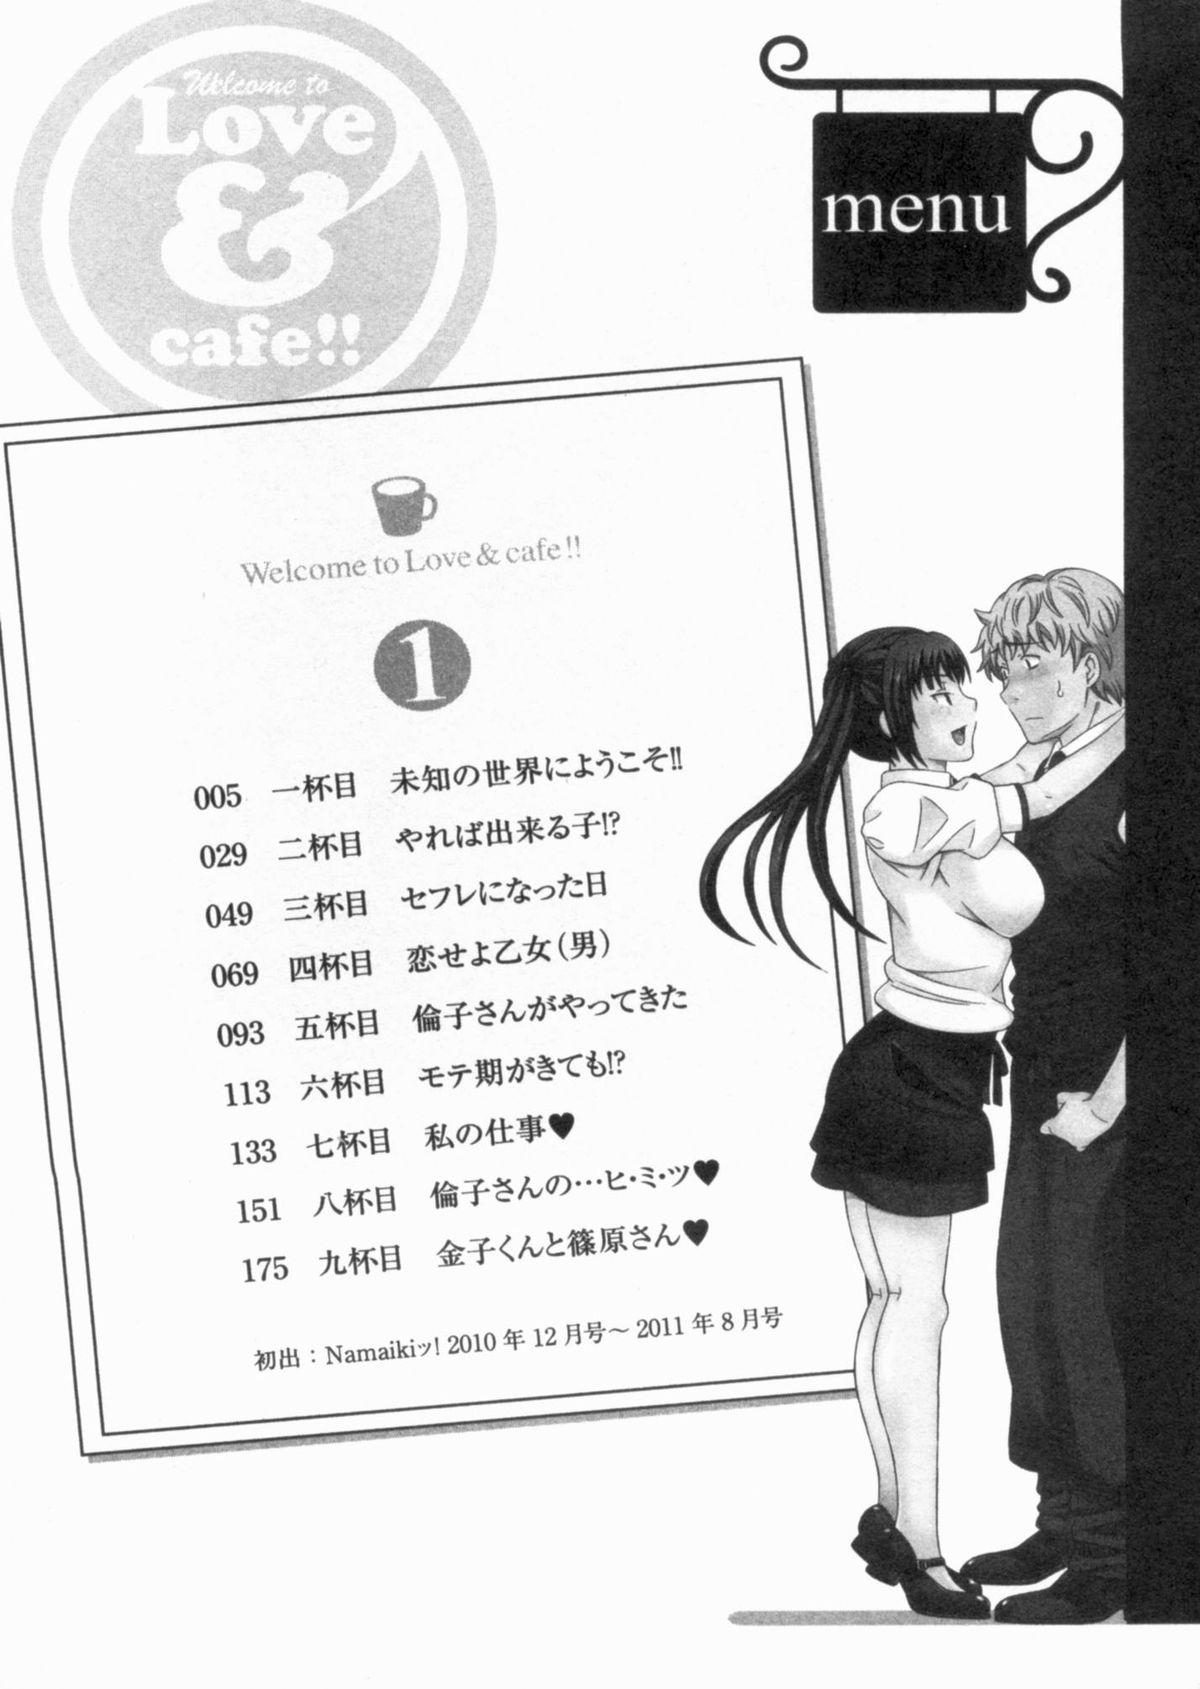 Classroom Koi Cafe ni Youkoso!! 1 - Welcome to Love&cafe!! 1 Older - Page 6